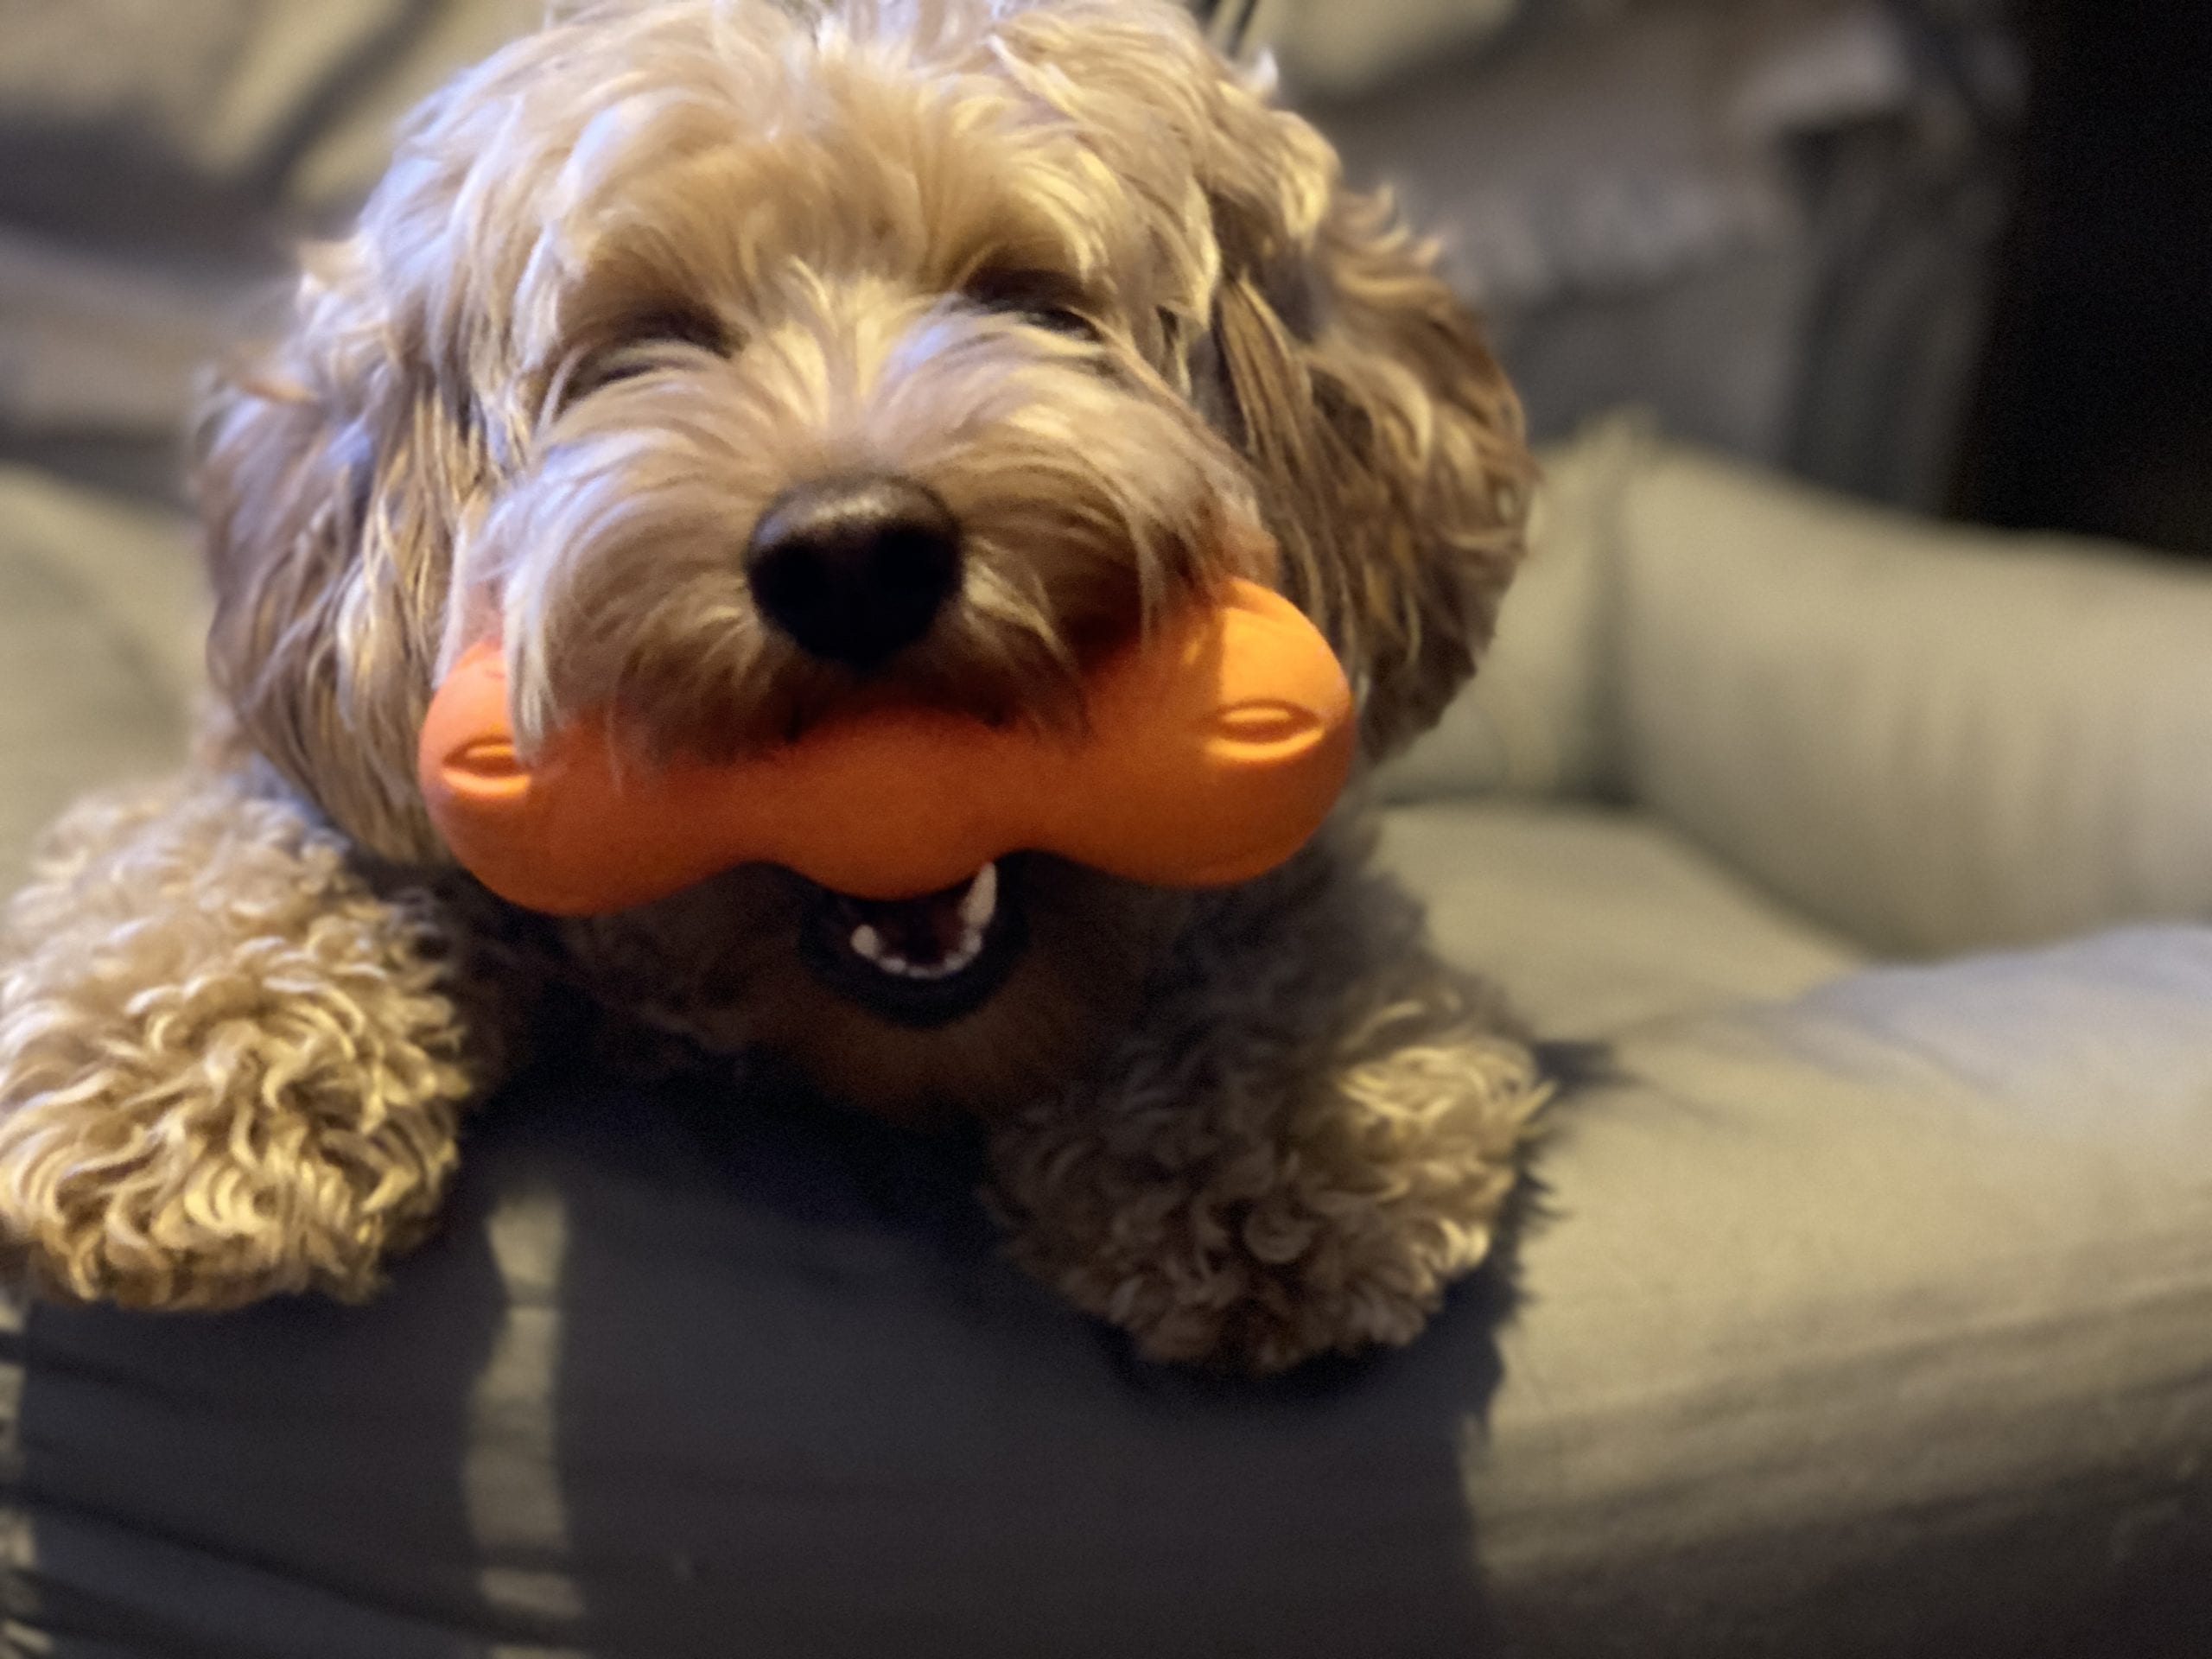 12 of the toughest dog toys